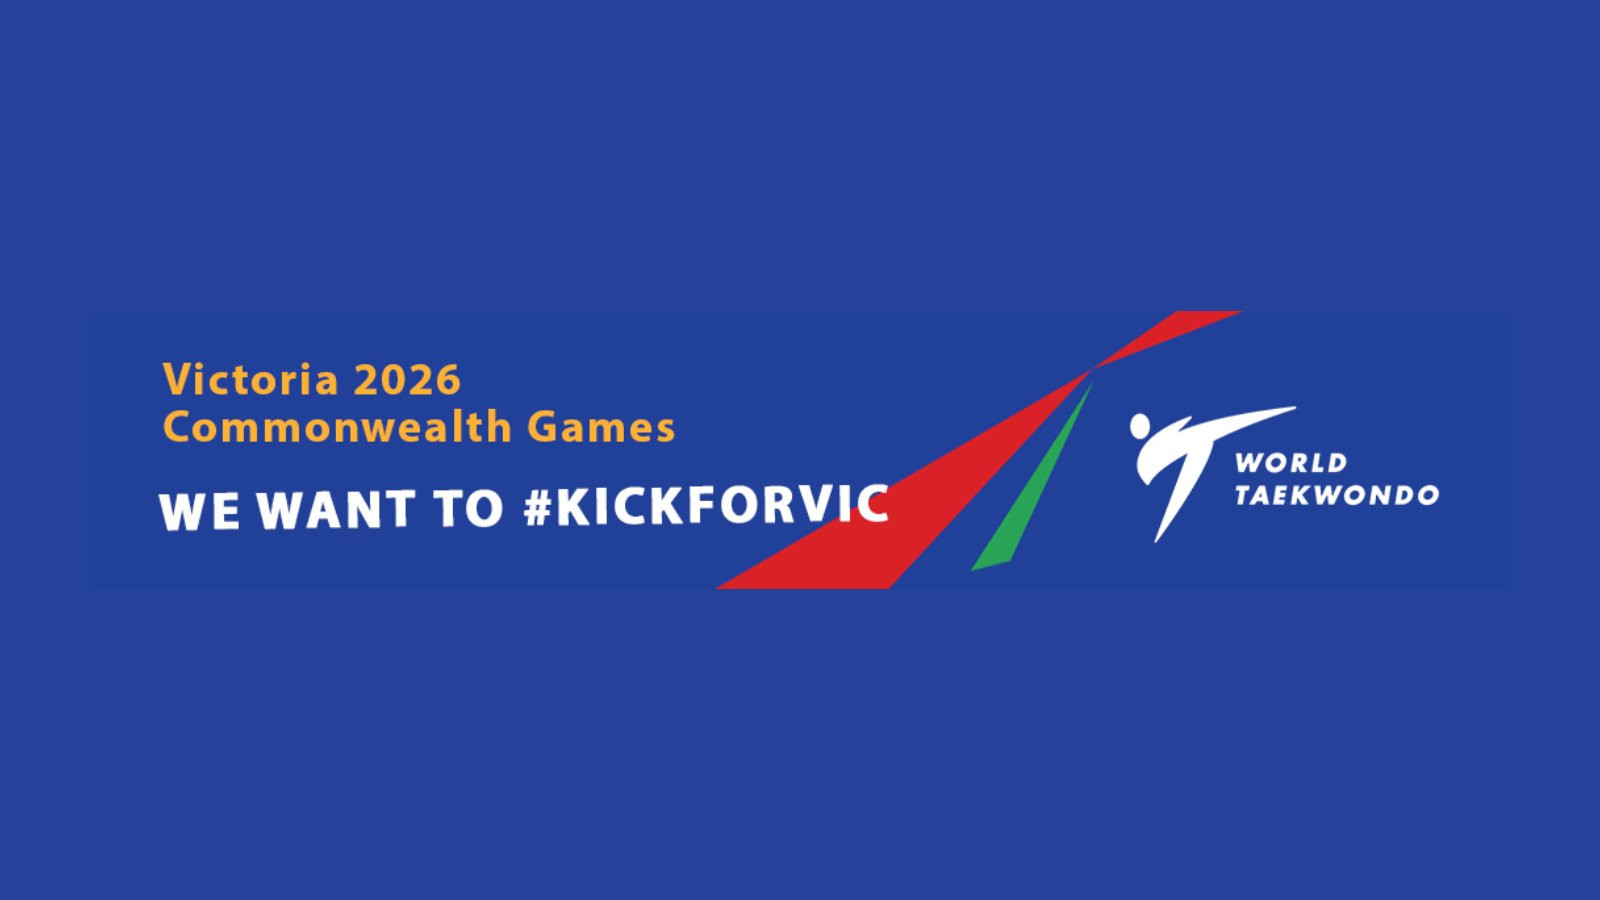 Taekwondo has launched a campaign to be included at Victoria 2026 Commonwealth Games ©World Taekwondo